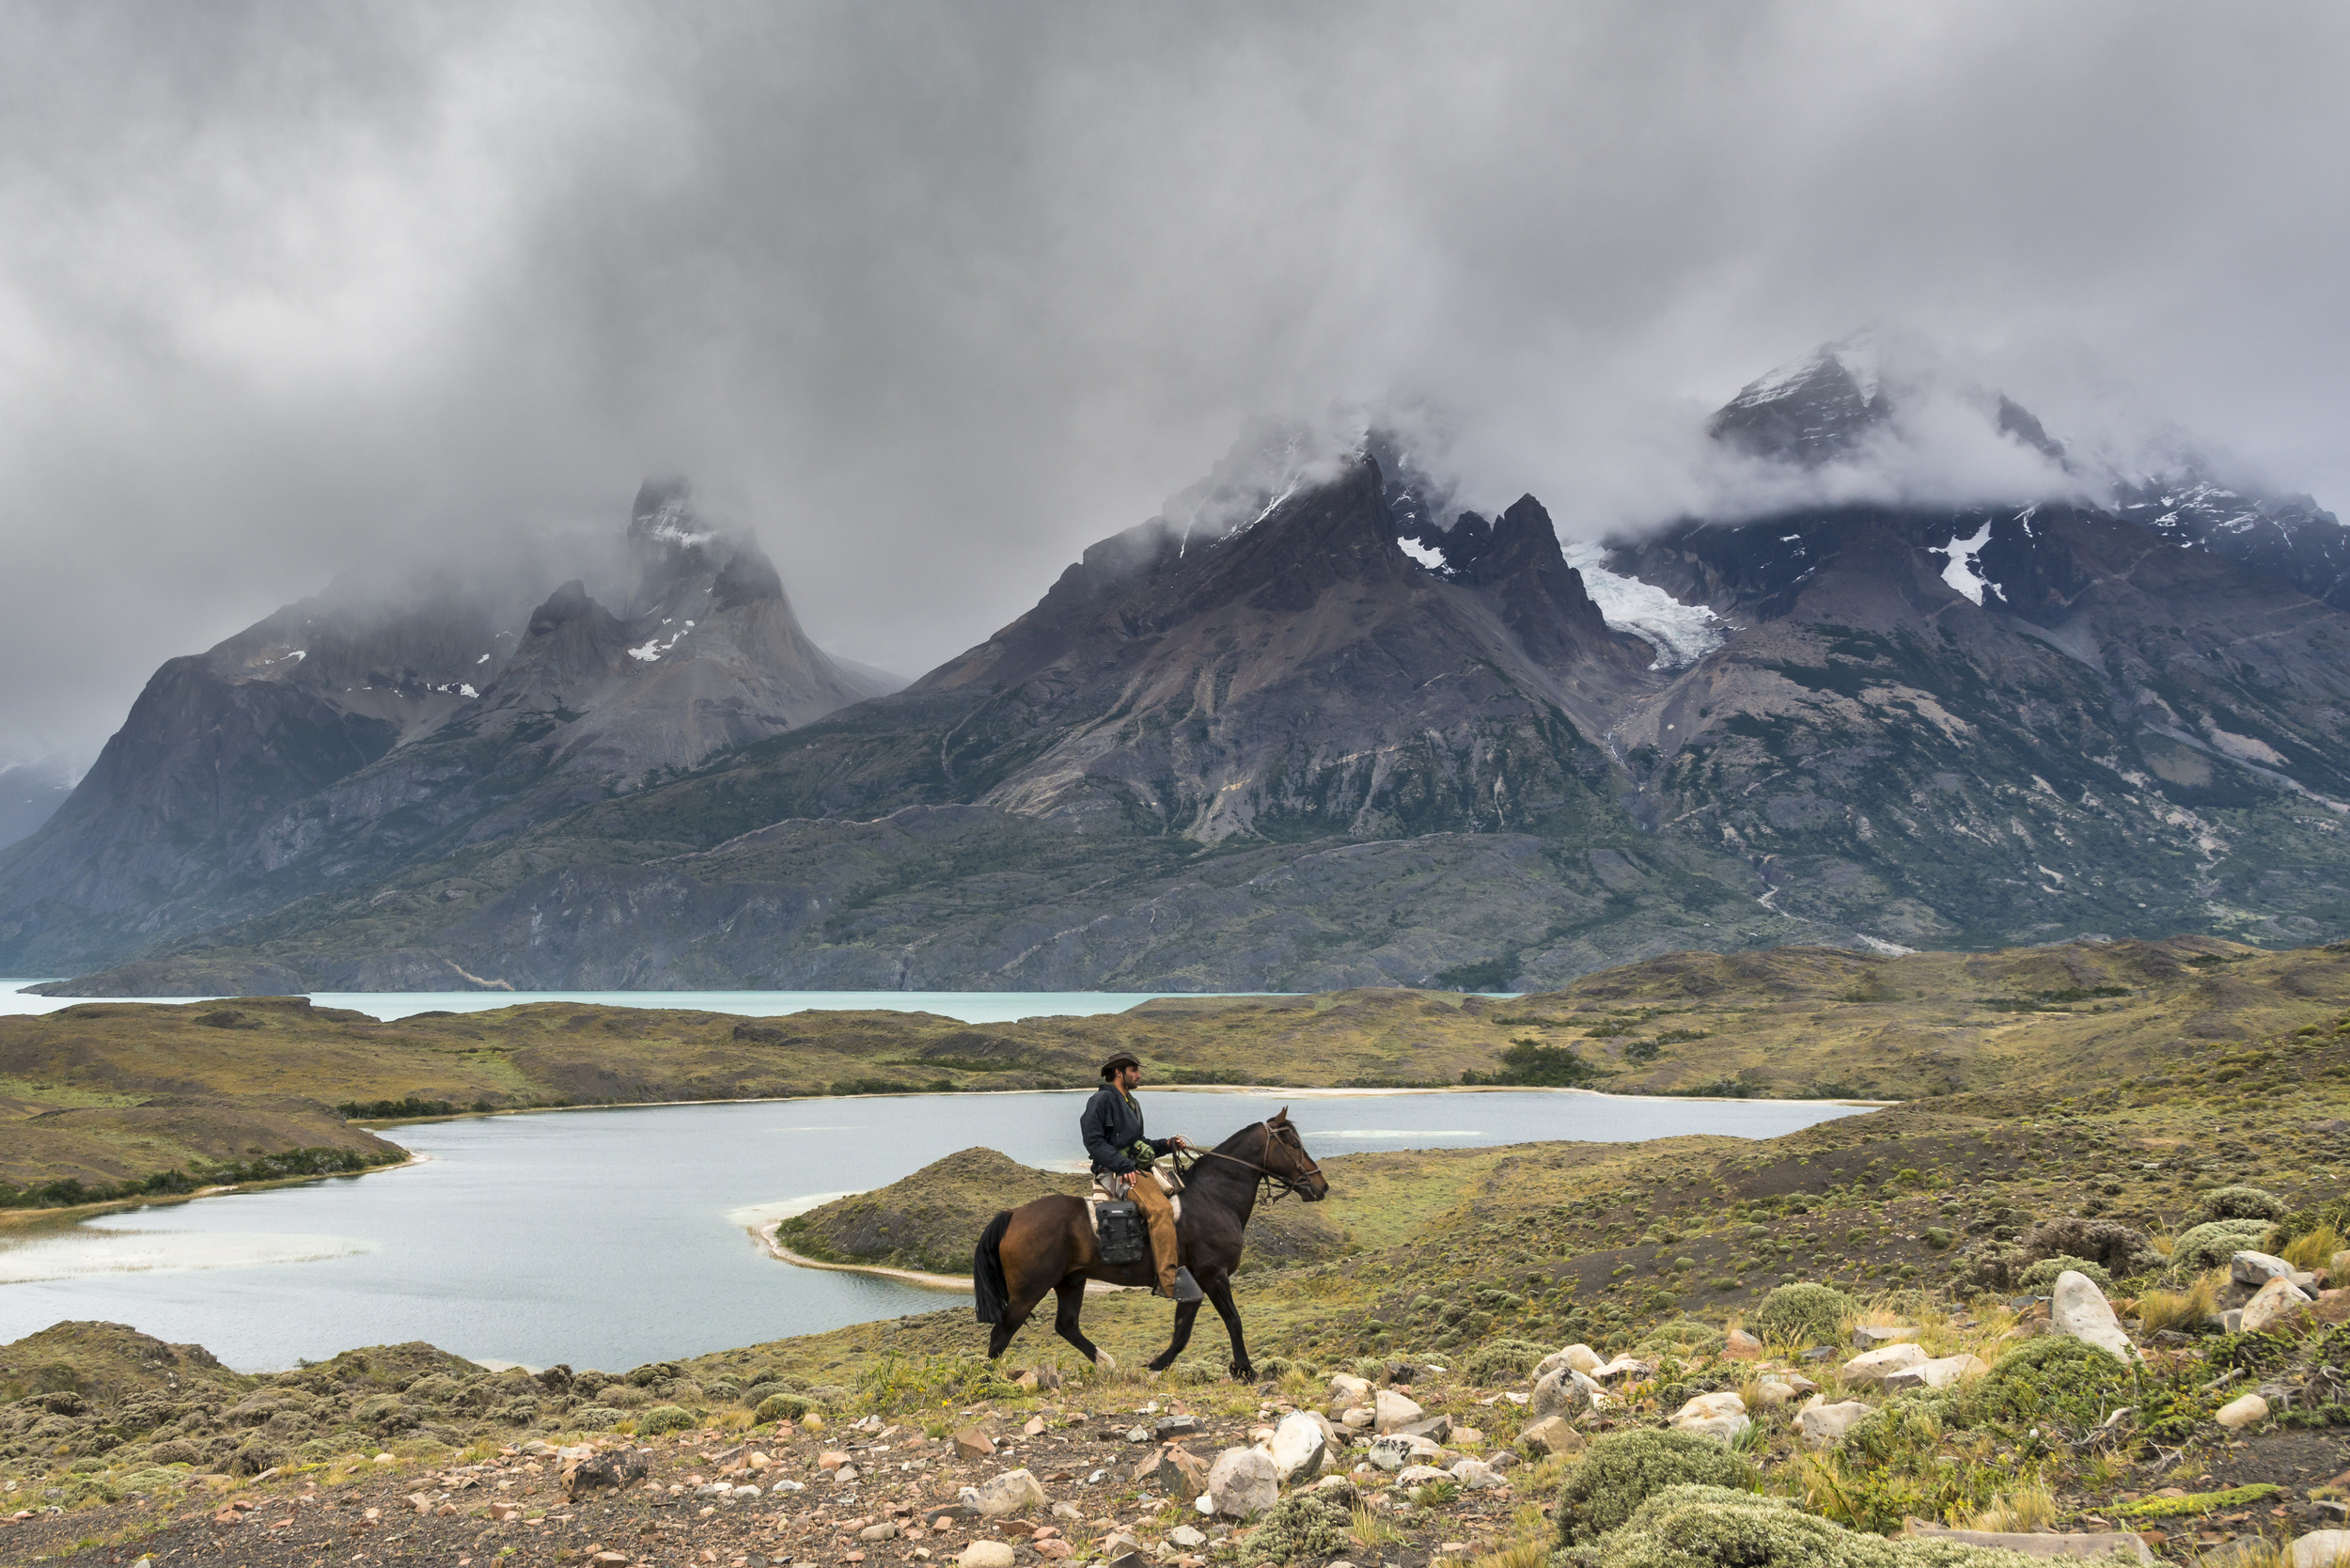 <p>Most travelers to South America’s most famous park explore on their own two feet. But, if you’re keen for a bit of a break or just a different vantage point, try a ride through the mountains. You can organize a day ride or an overnight trek with many Patagonian tour companies.</p><p>You may also like: <a href='https://www.yardbarker.com/lifestyle/articles/17_budget_friendly_ways_to_keep_yourself_and_your_home_cool_in_the_summer/s1__39042391'>17 budget-friendly ways to keep yourself (and your home) cool in the summer</a></p>